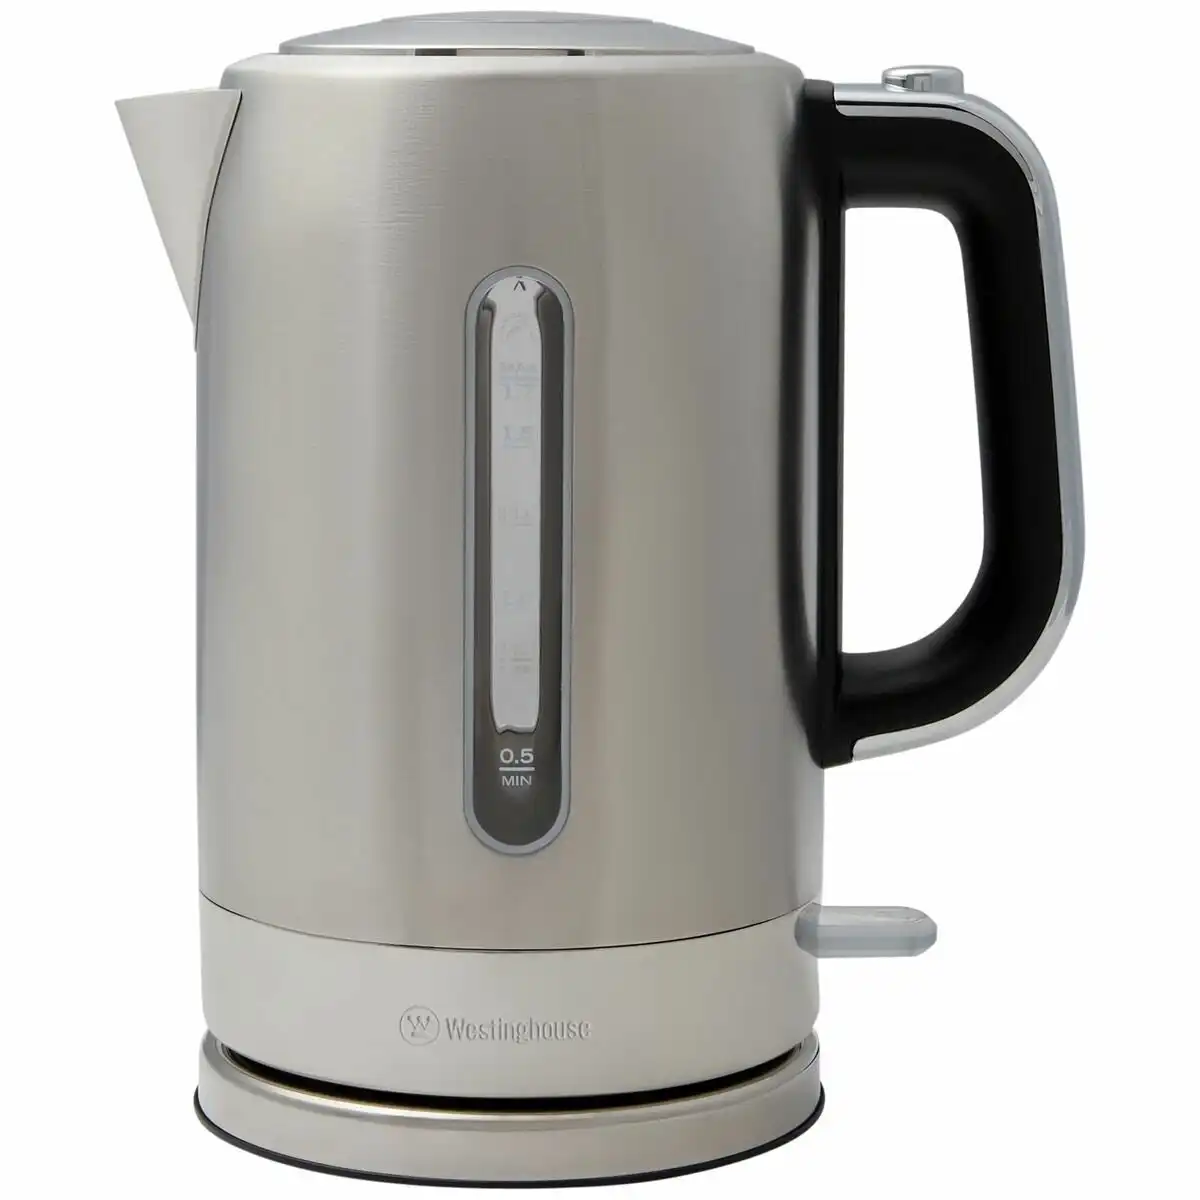 Westinghouse 1.7L Deluxe Kettle Stainless Steel